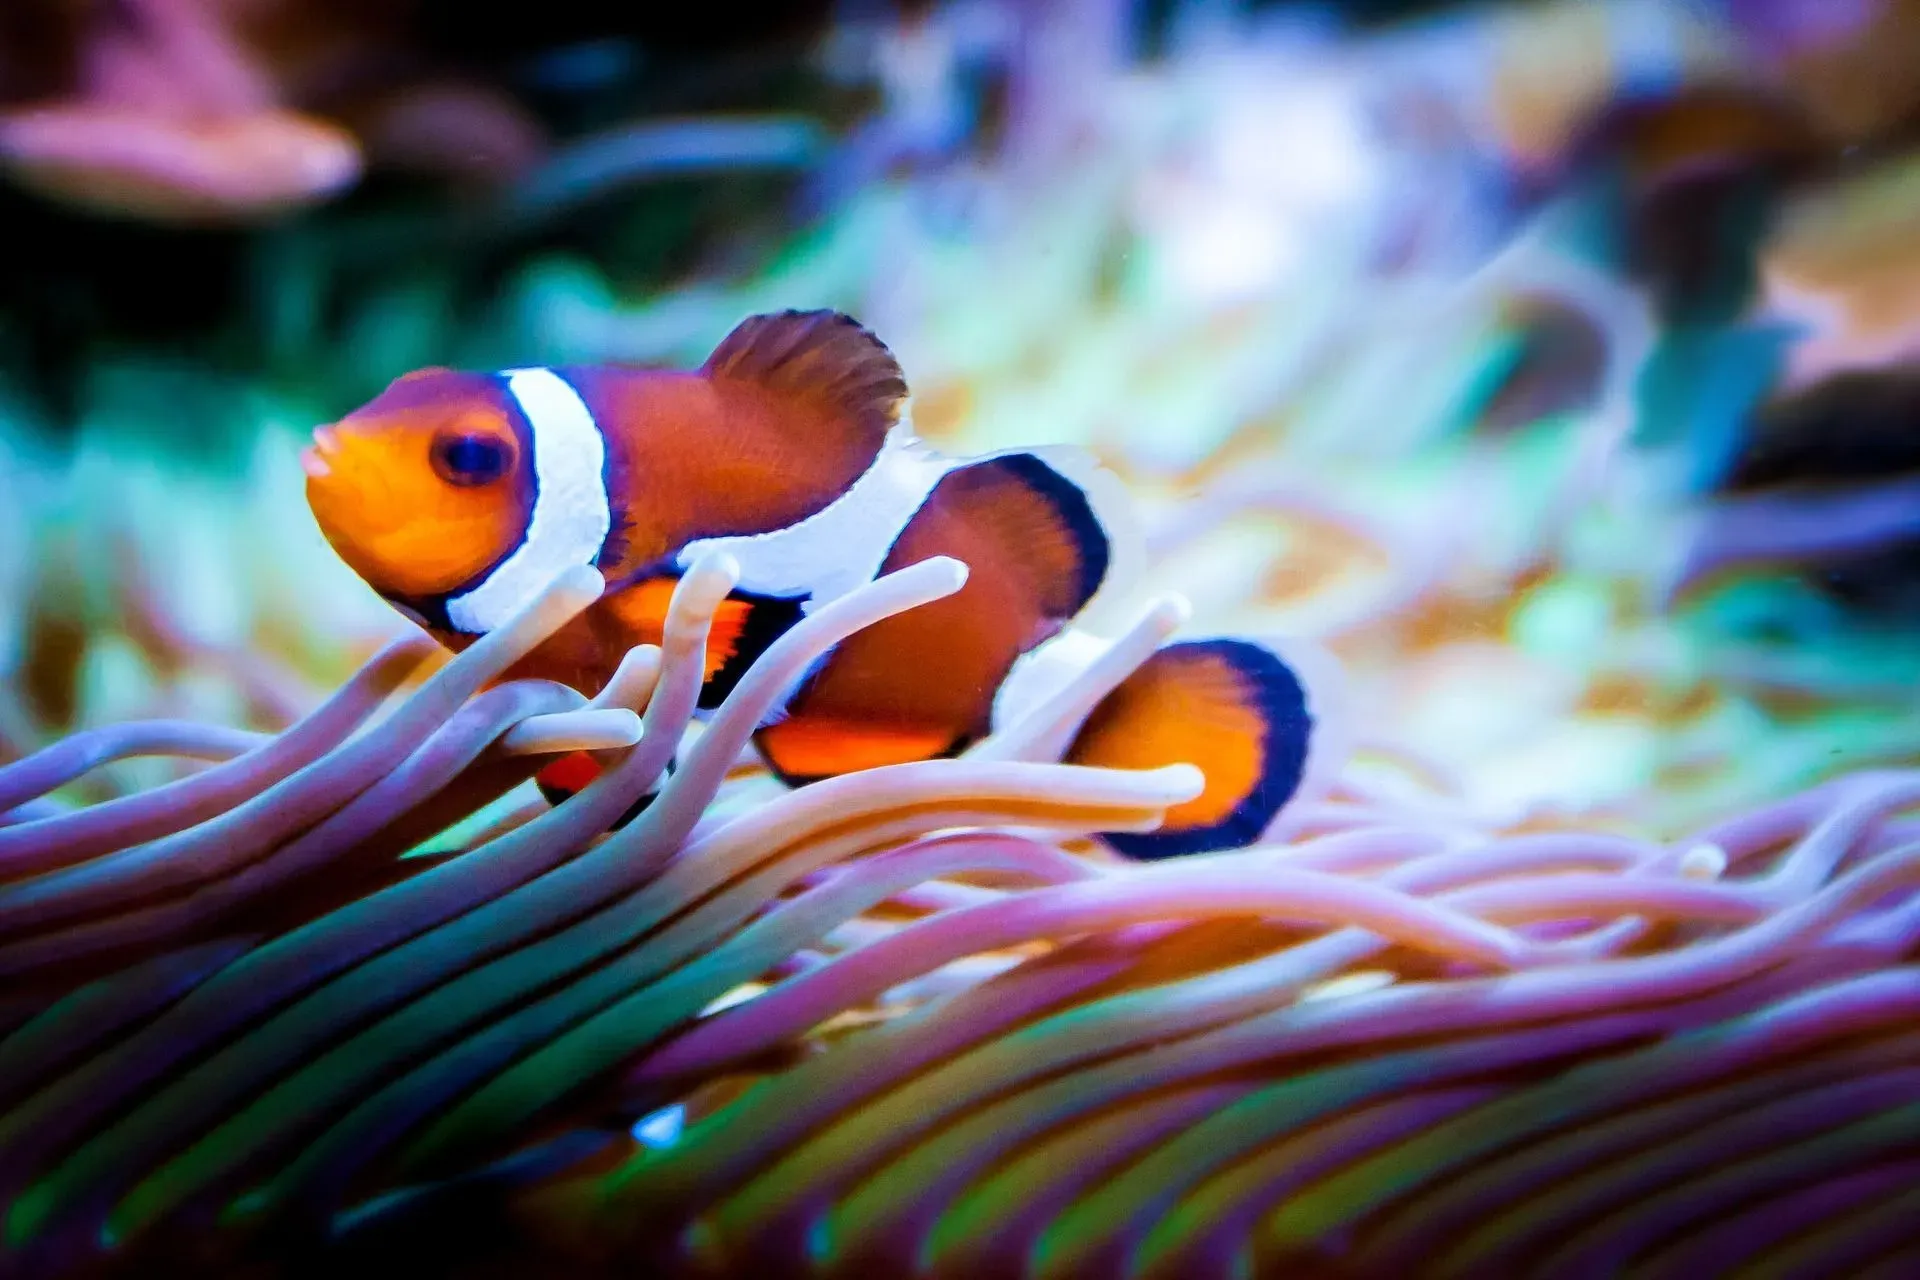 Before feeding your clownfish, you probably want to know what do clownfish eat?